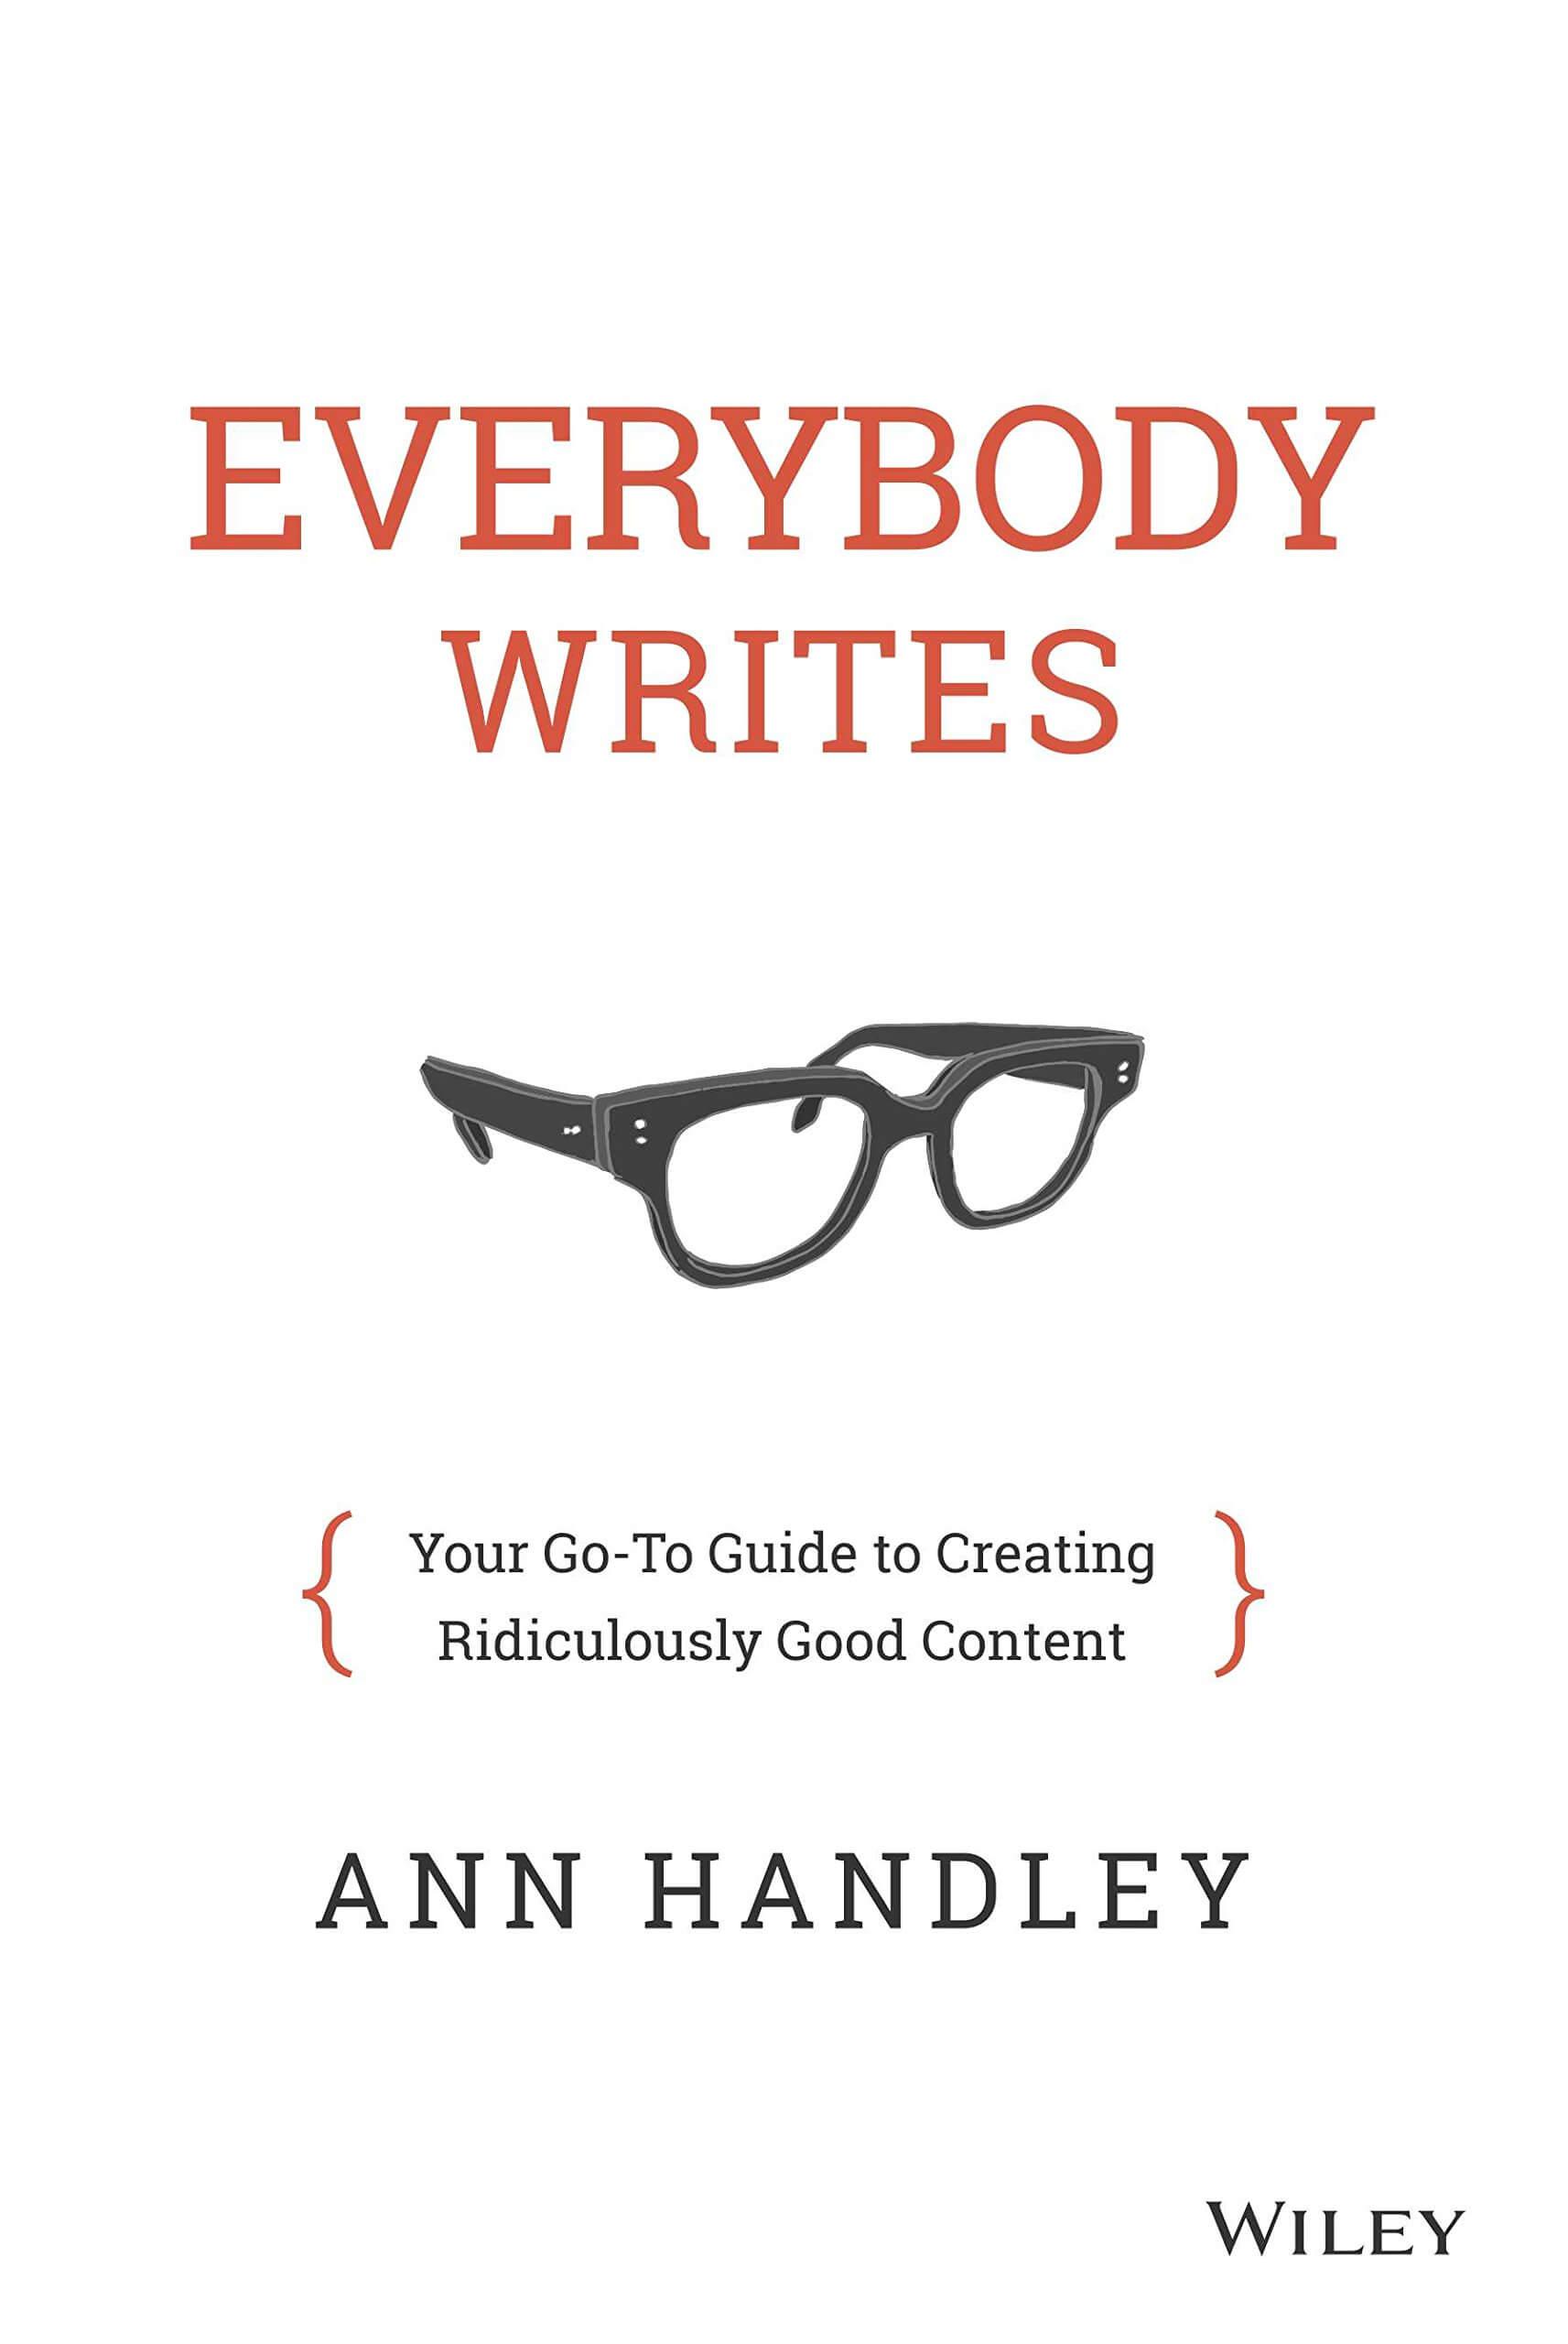 Book cover for Ann Handley's "Everybody Writes"